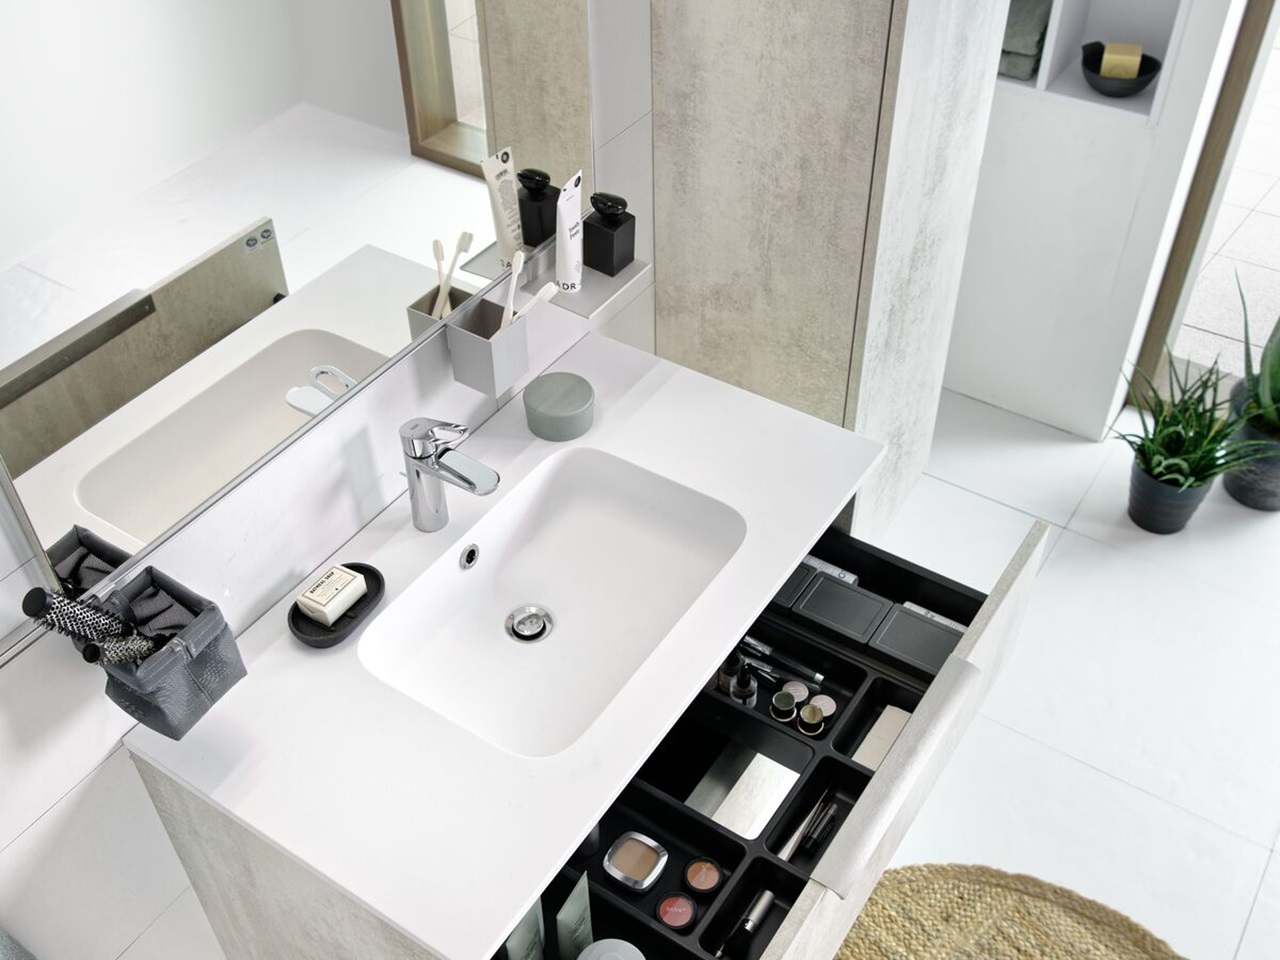 Washbasin unit with pull-out drawer and organiser for toiletries